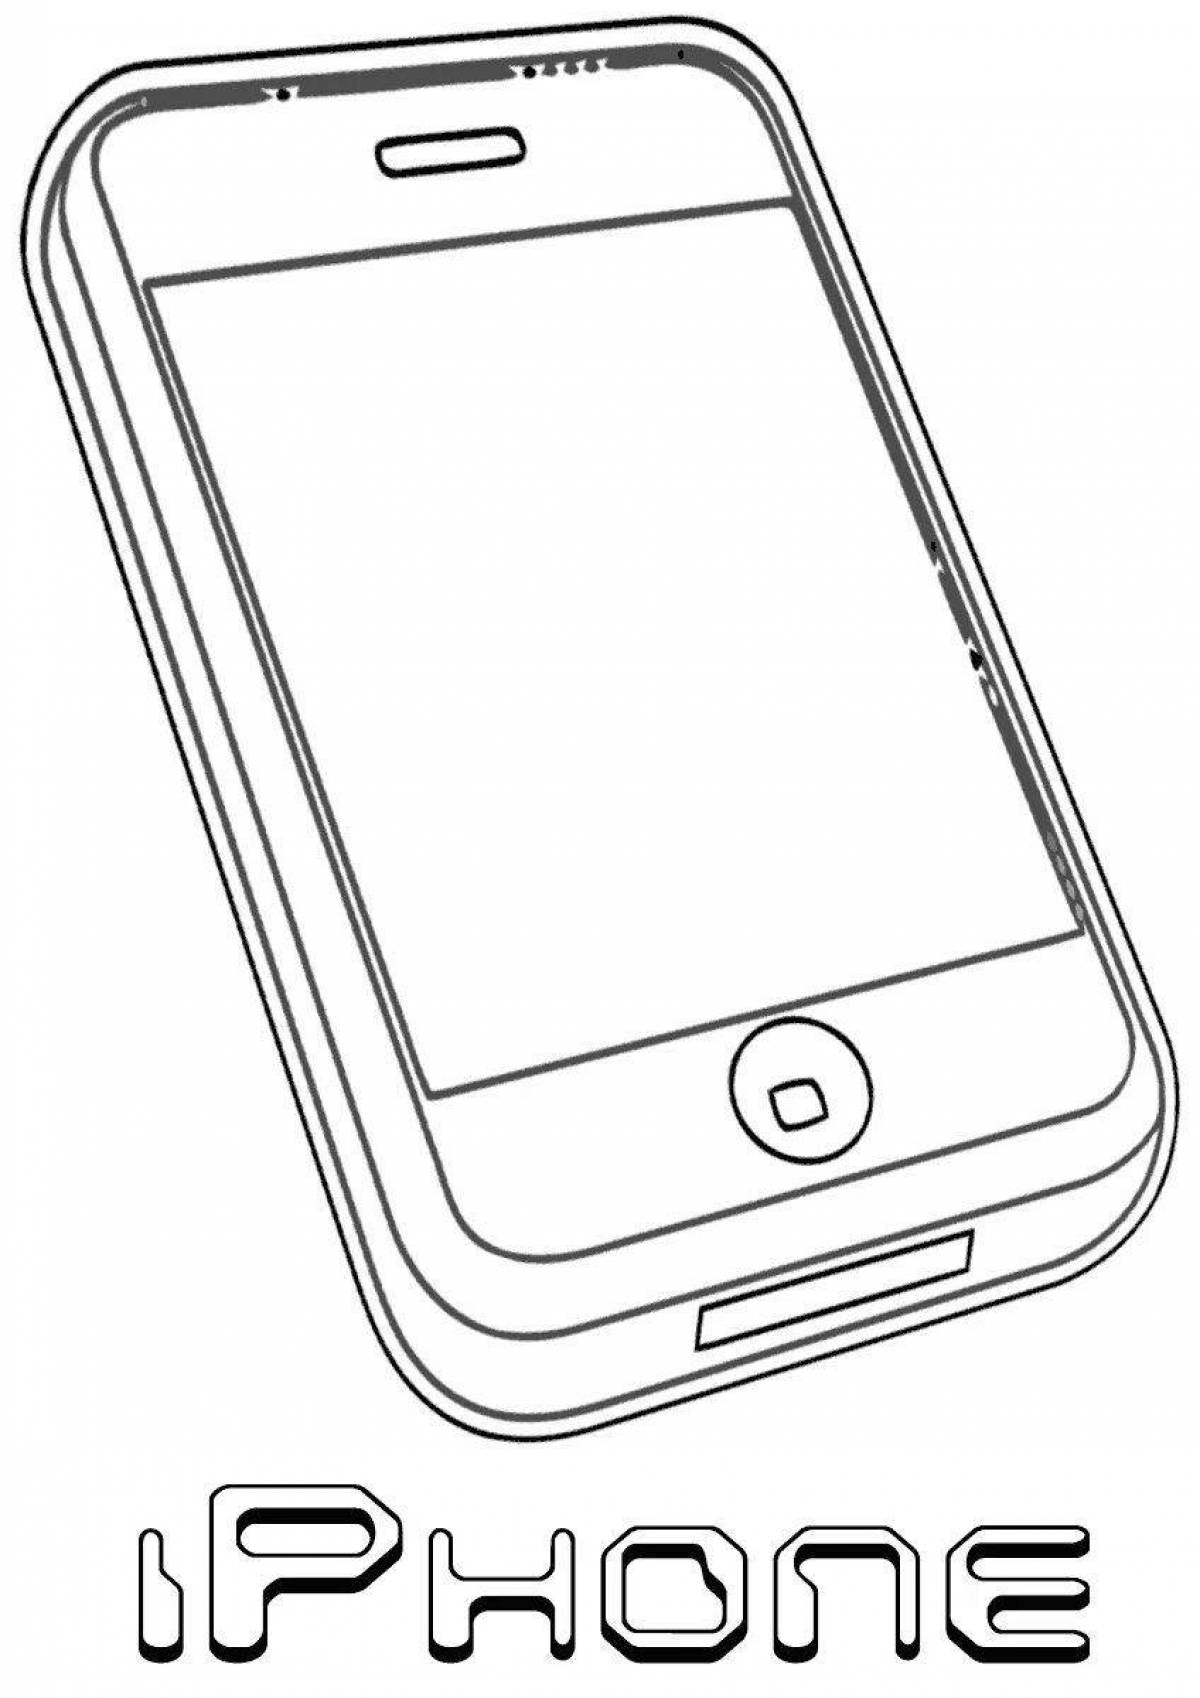 Color-galore phone coloring page for boys